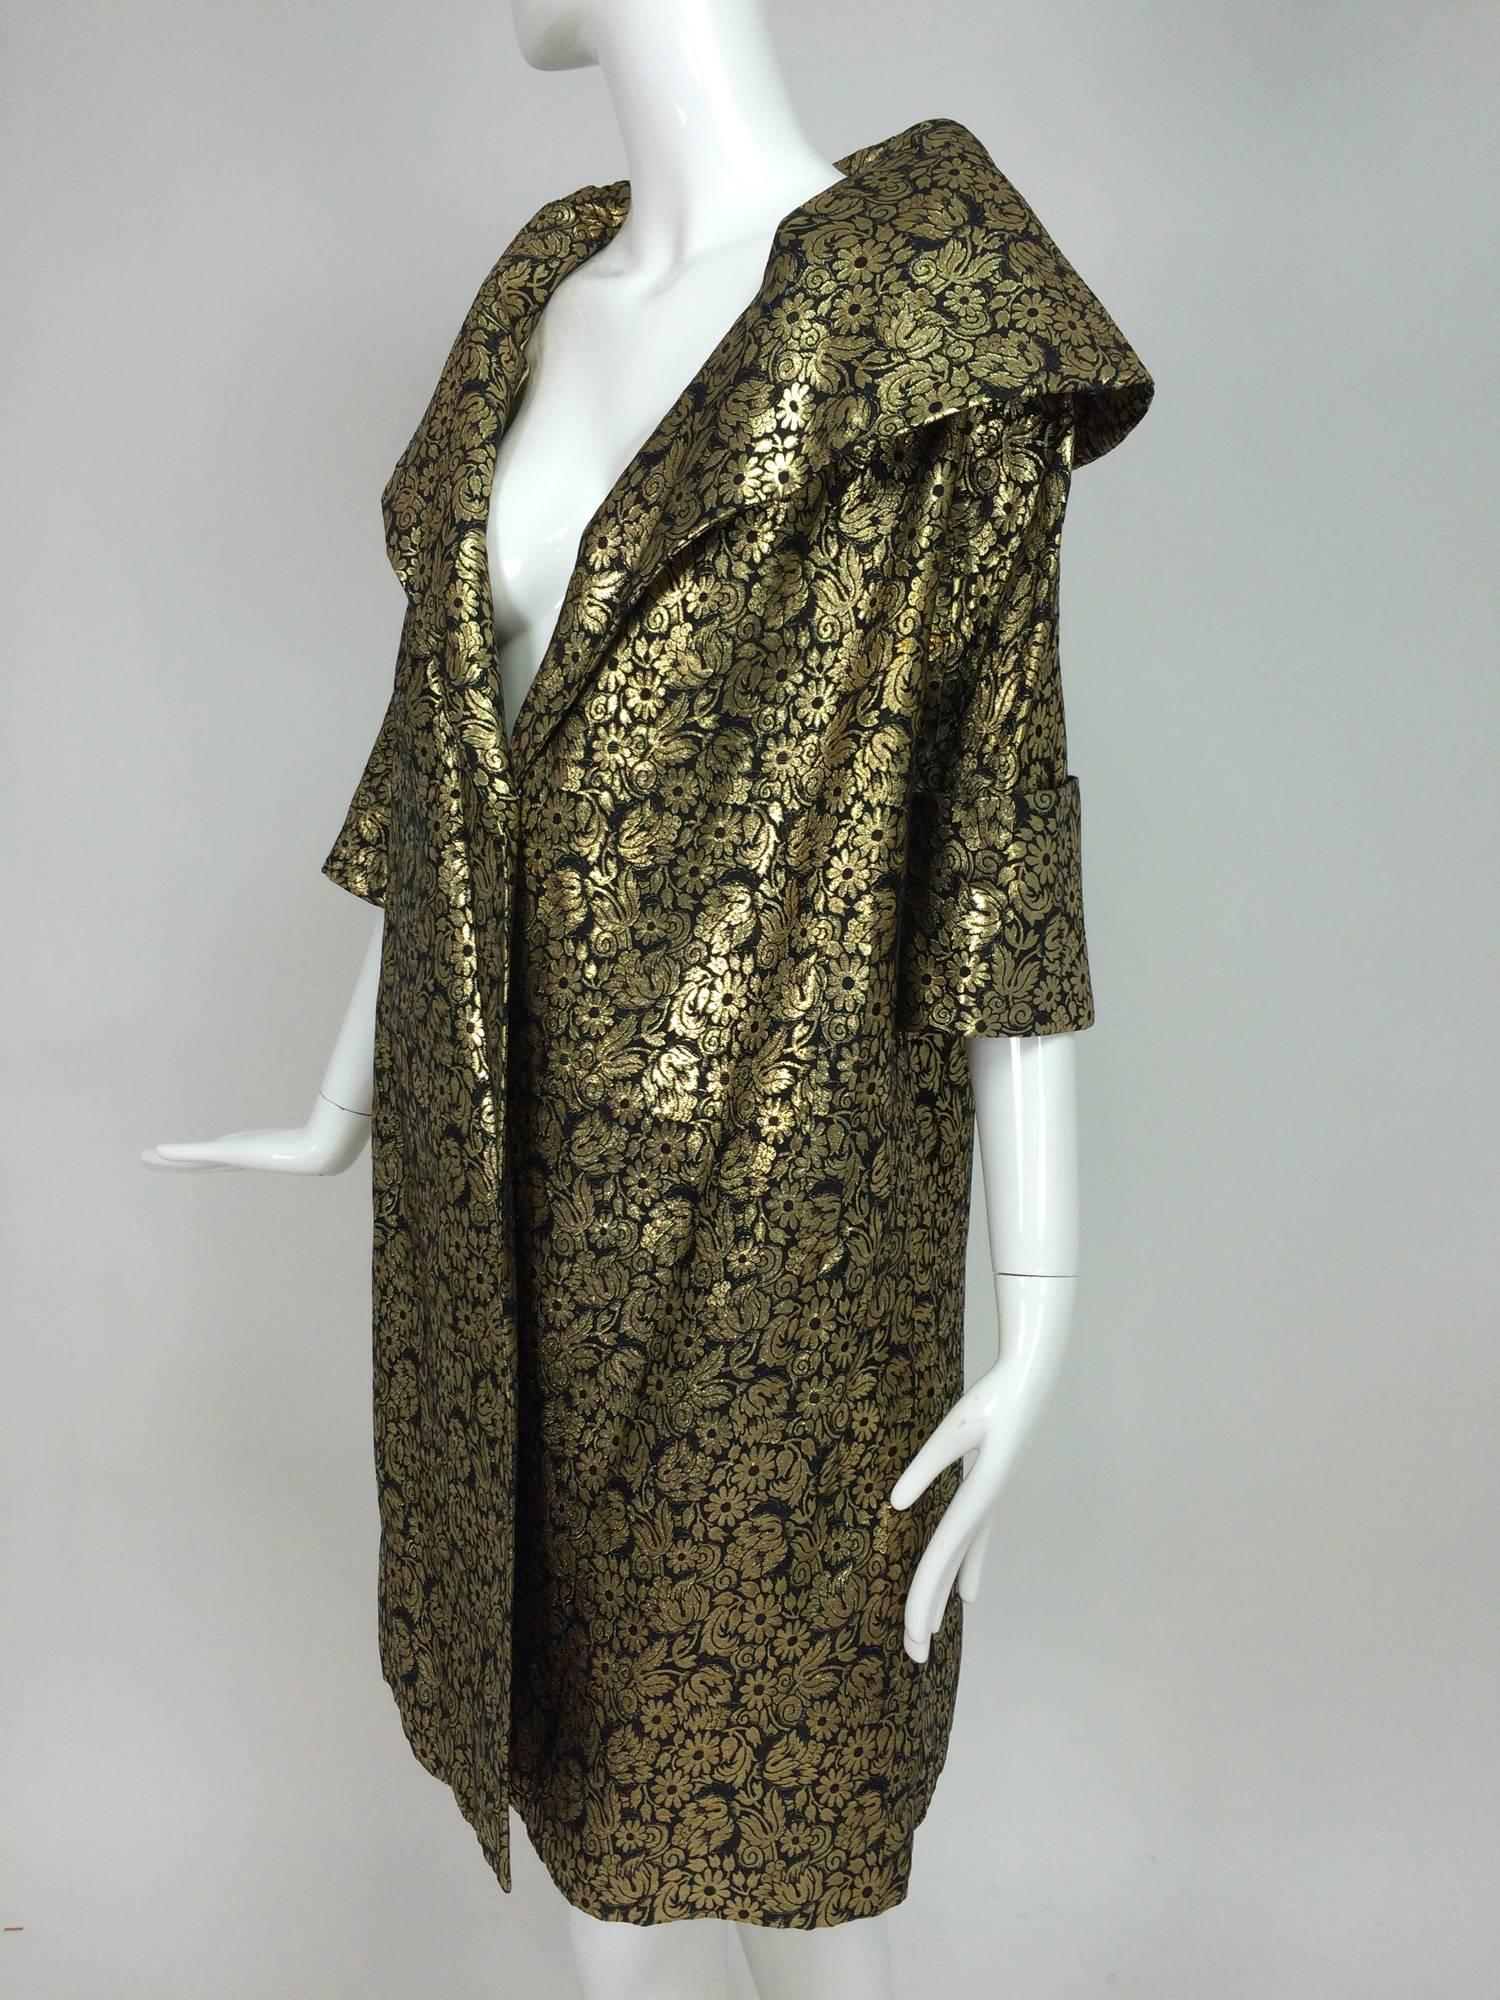 Vintage gold brocade shawl collar evening coat 1950s...This beautiful coat features a deep shawl collar that can be worn up, to frame your face...3/4 length deep cuff raglan sleeves...side front banded pockets...the back has a long inverted pleat